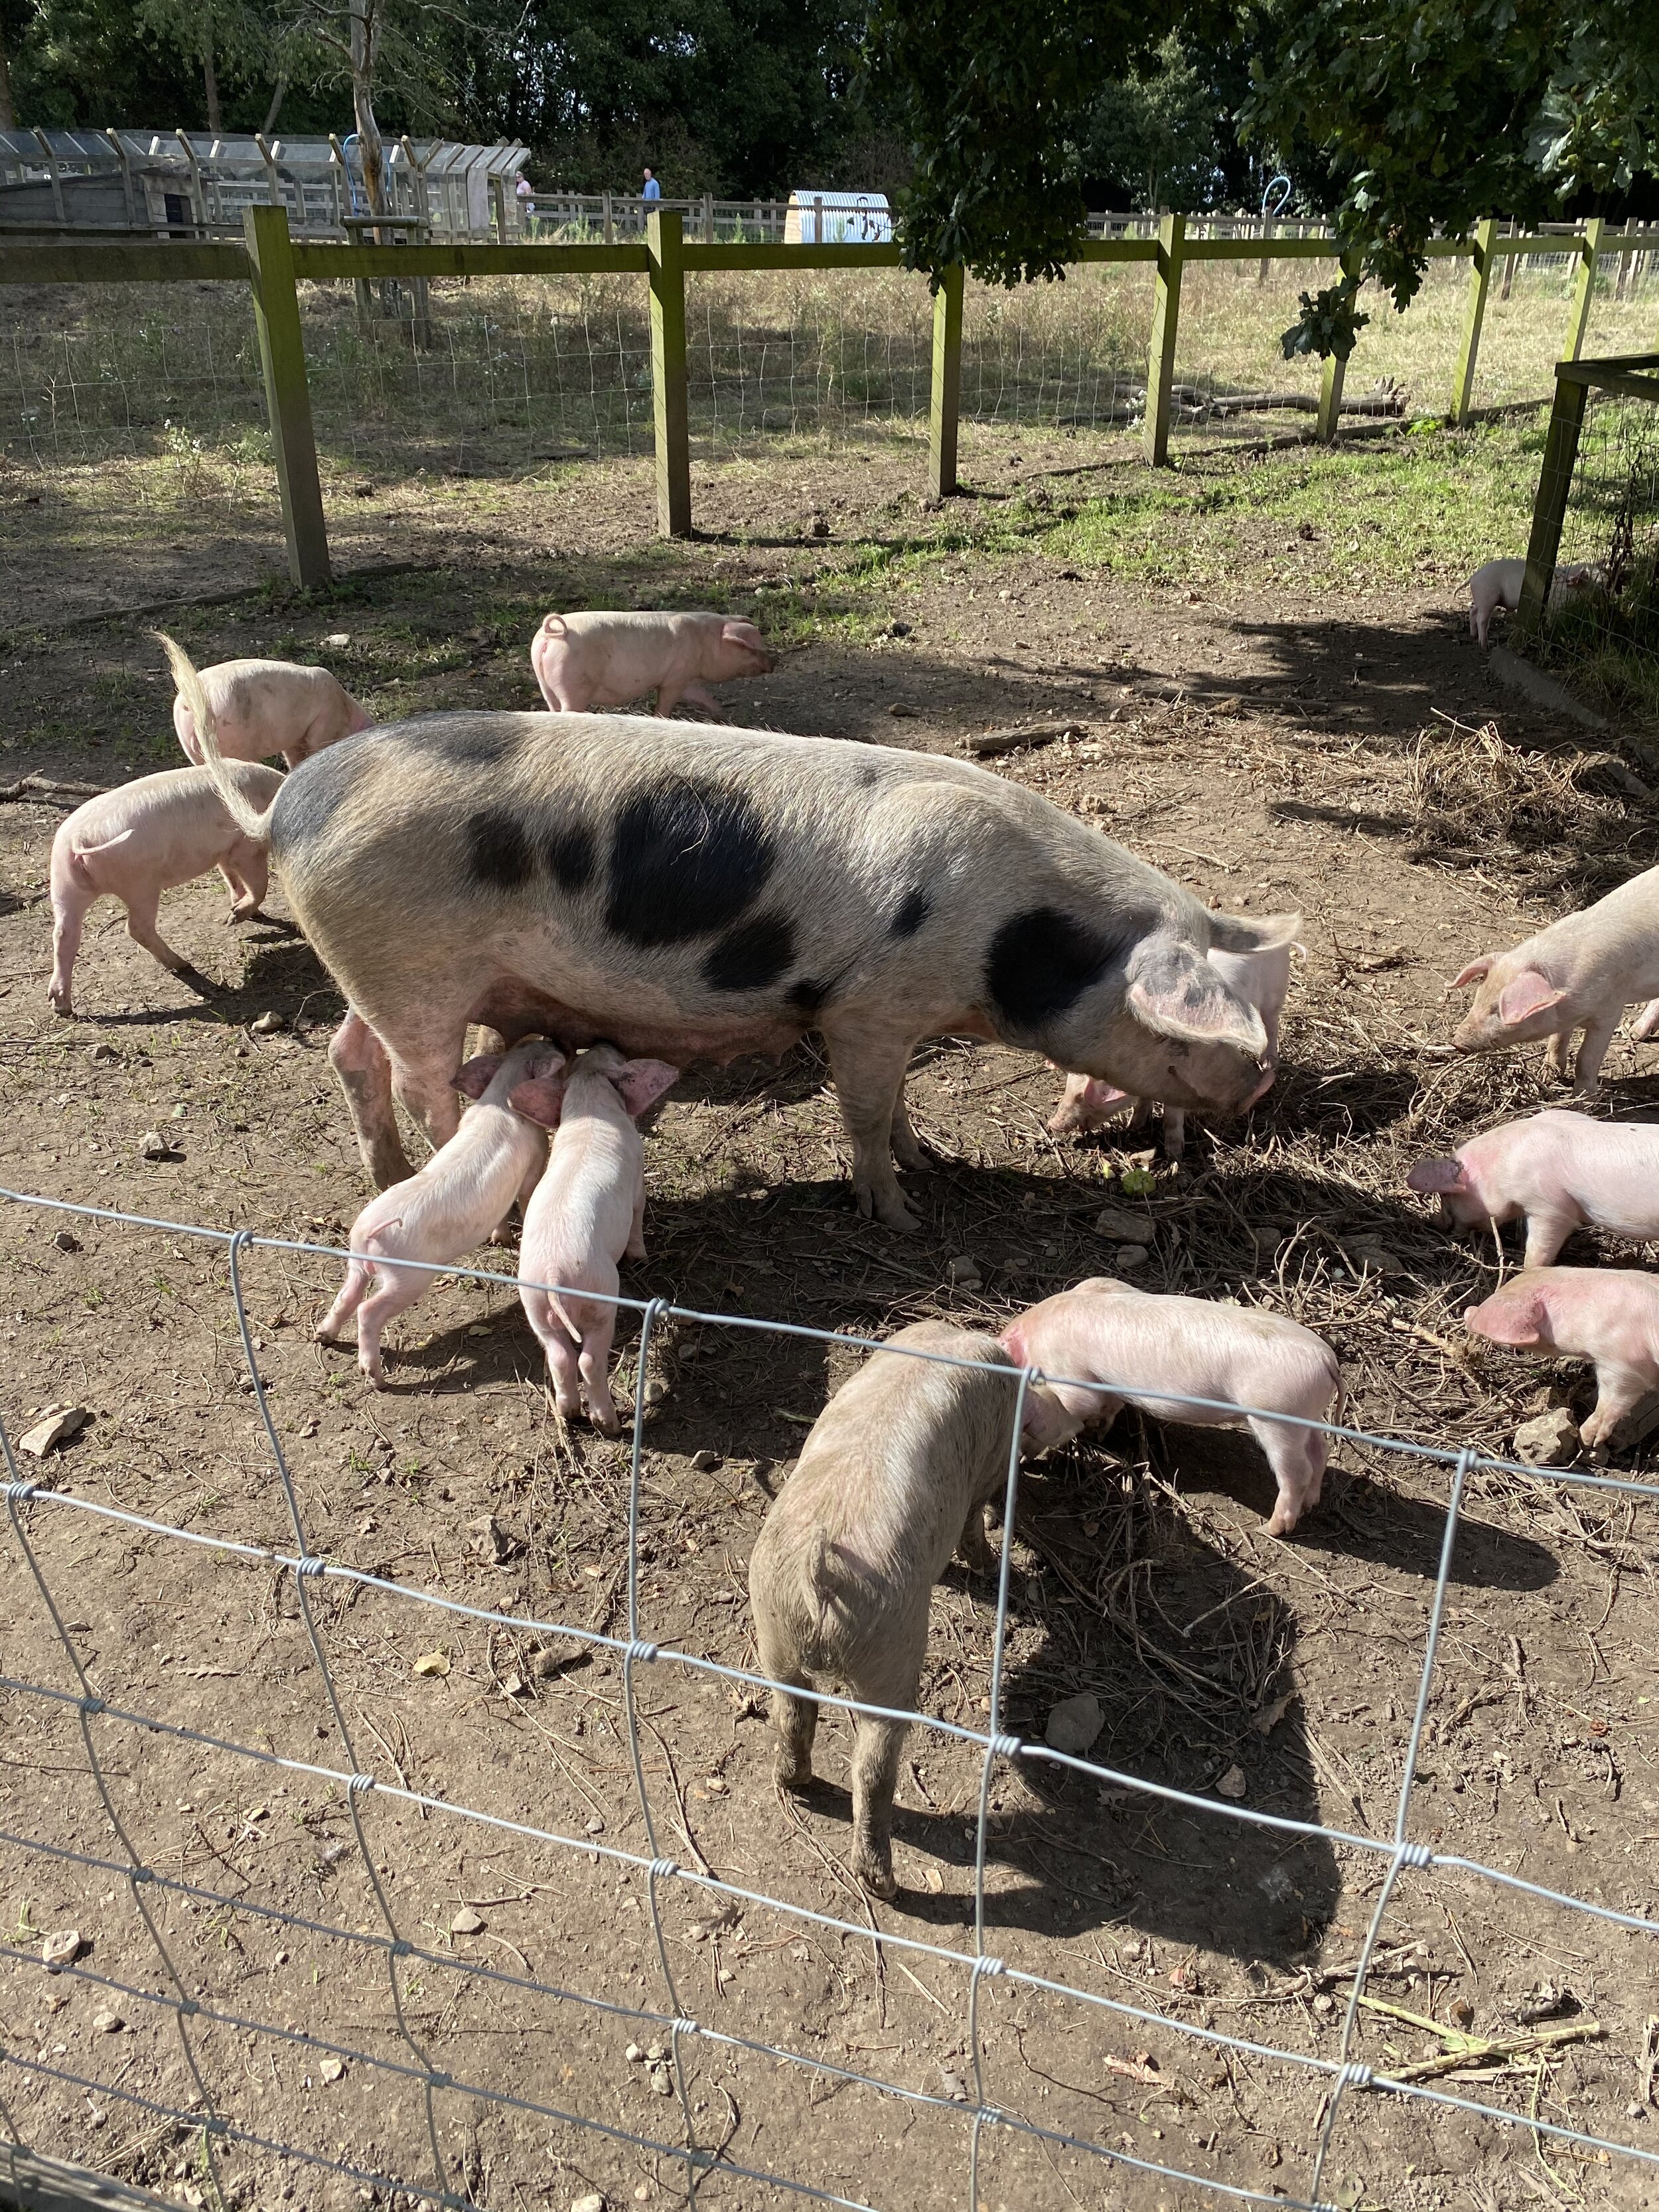 There are piggies at Quarr Abbey.